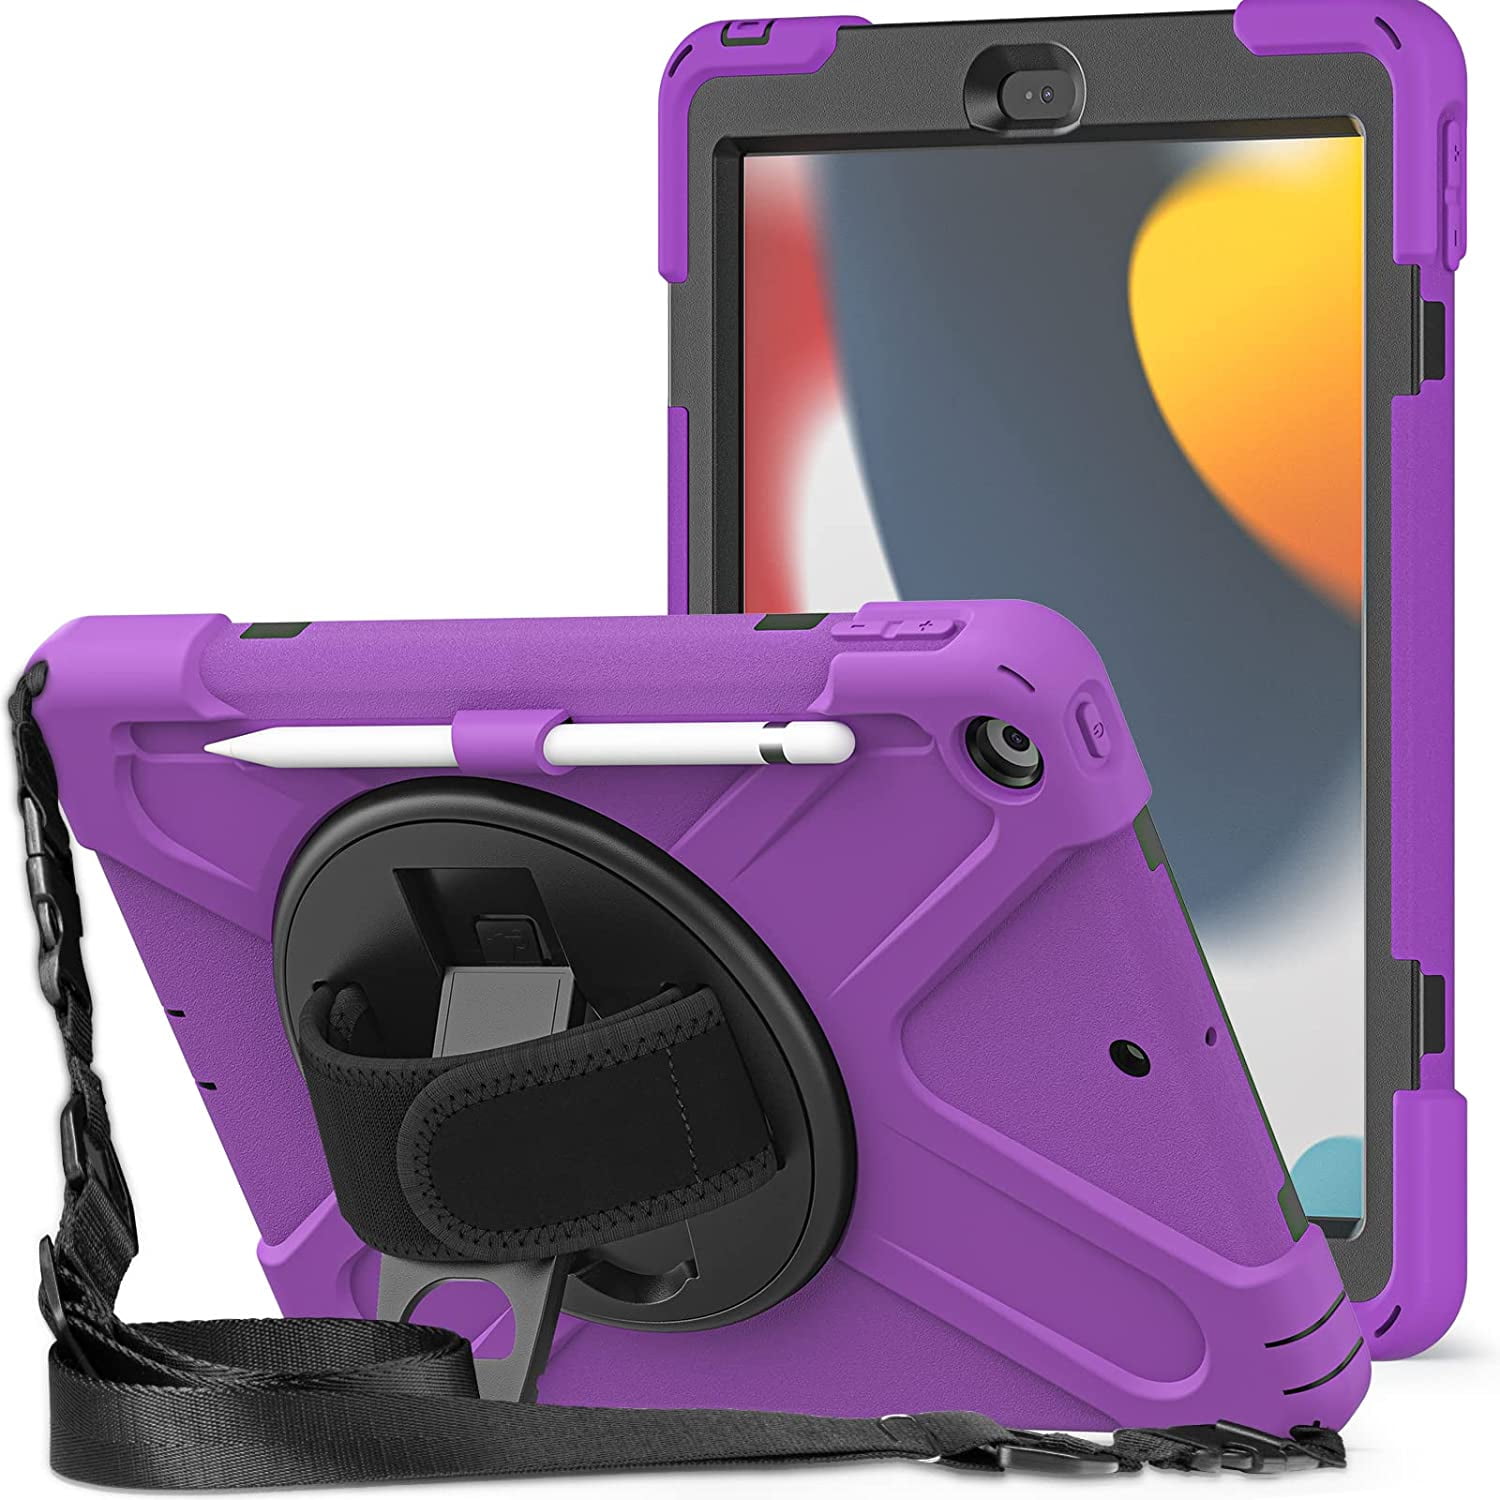 ulykke transaktion Displacement KIQ Shield 10.2 inch iPad Case 9th Generation, iPad 8th & 7th Generation  Case 2021/2020/2019, Heavy Duty Rugged Protective Cover for iPad 9 8 7 Gen  10.2 Inch iPad Case for Kids - Purple - Walmart.com